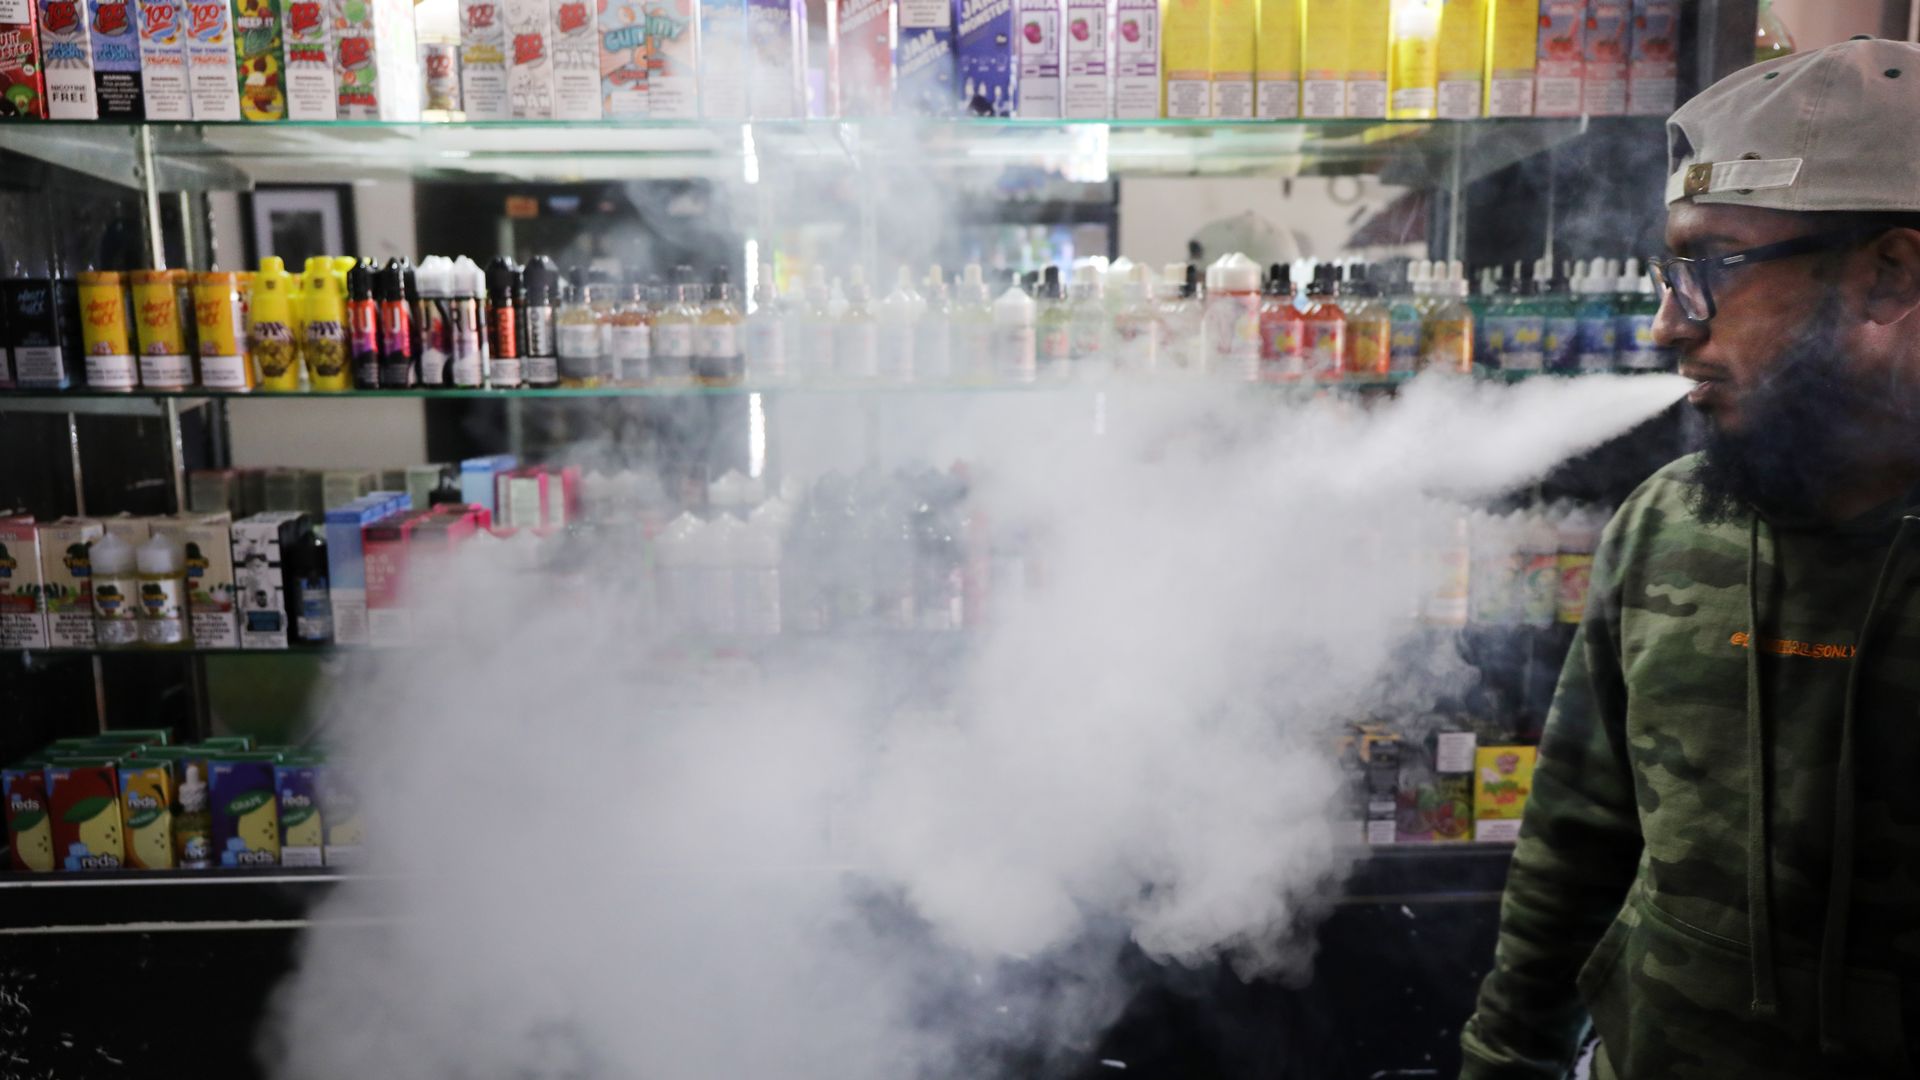 In this image, a man blows smoke inside a vape shop, where the walls are lined with e-cigarette products.